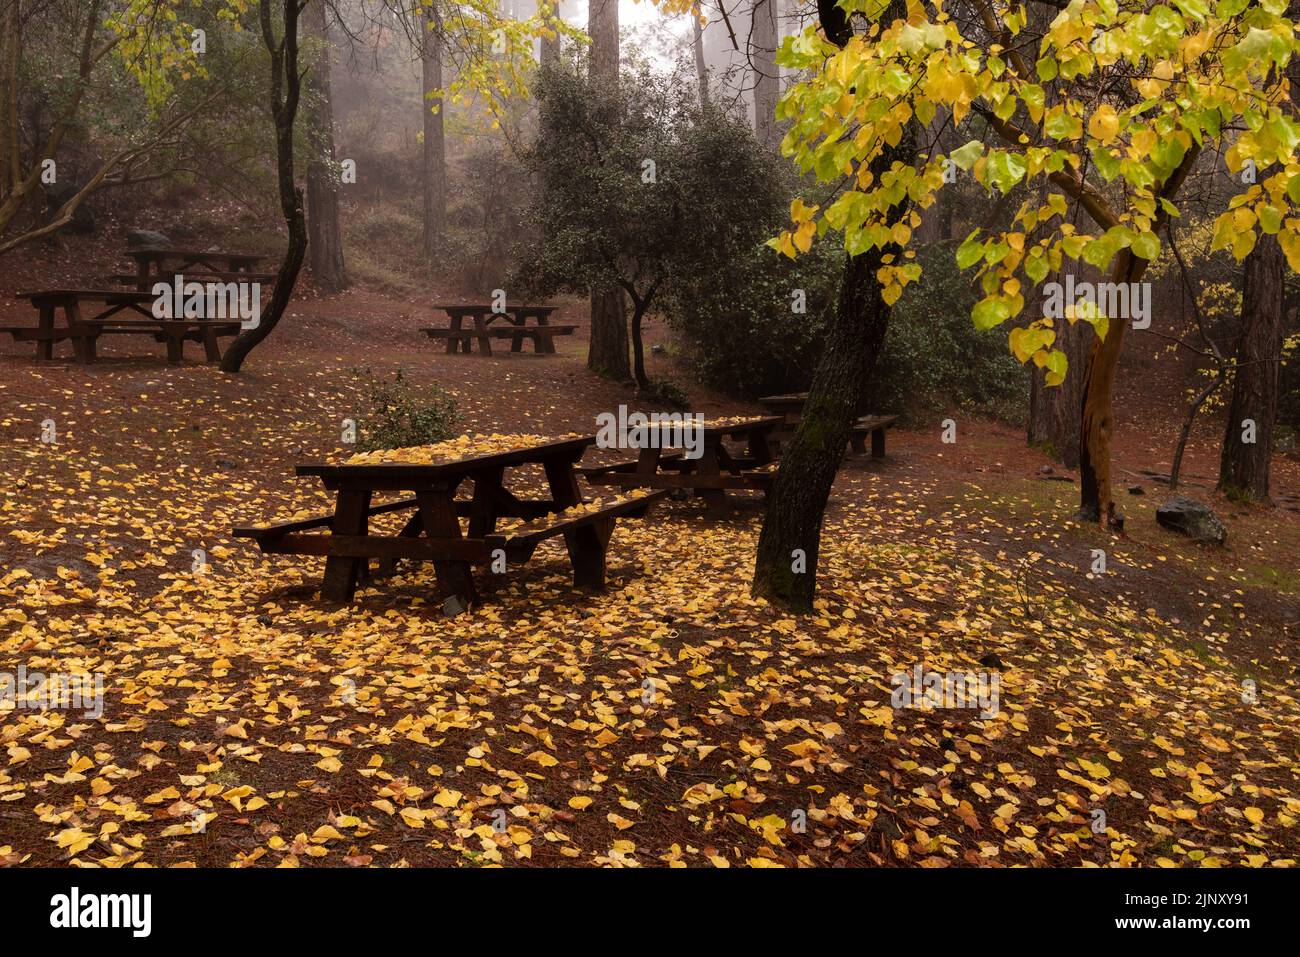 Autumn landscape with trees and Autumn leaves on the ground after rain Stock Photo